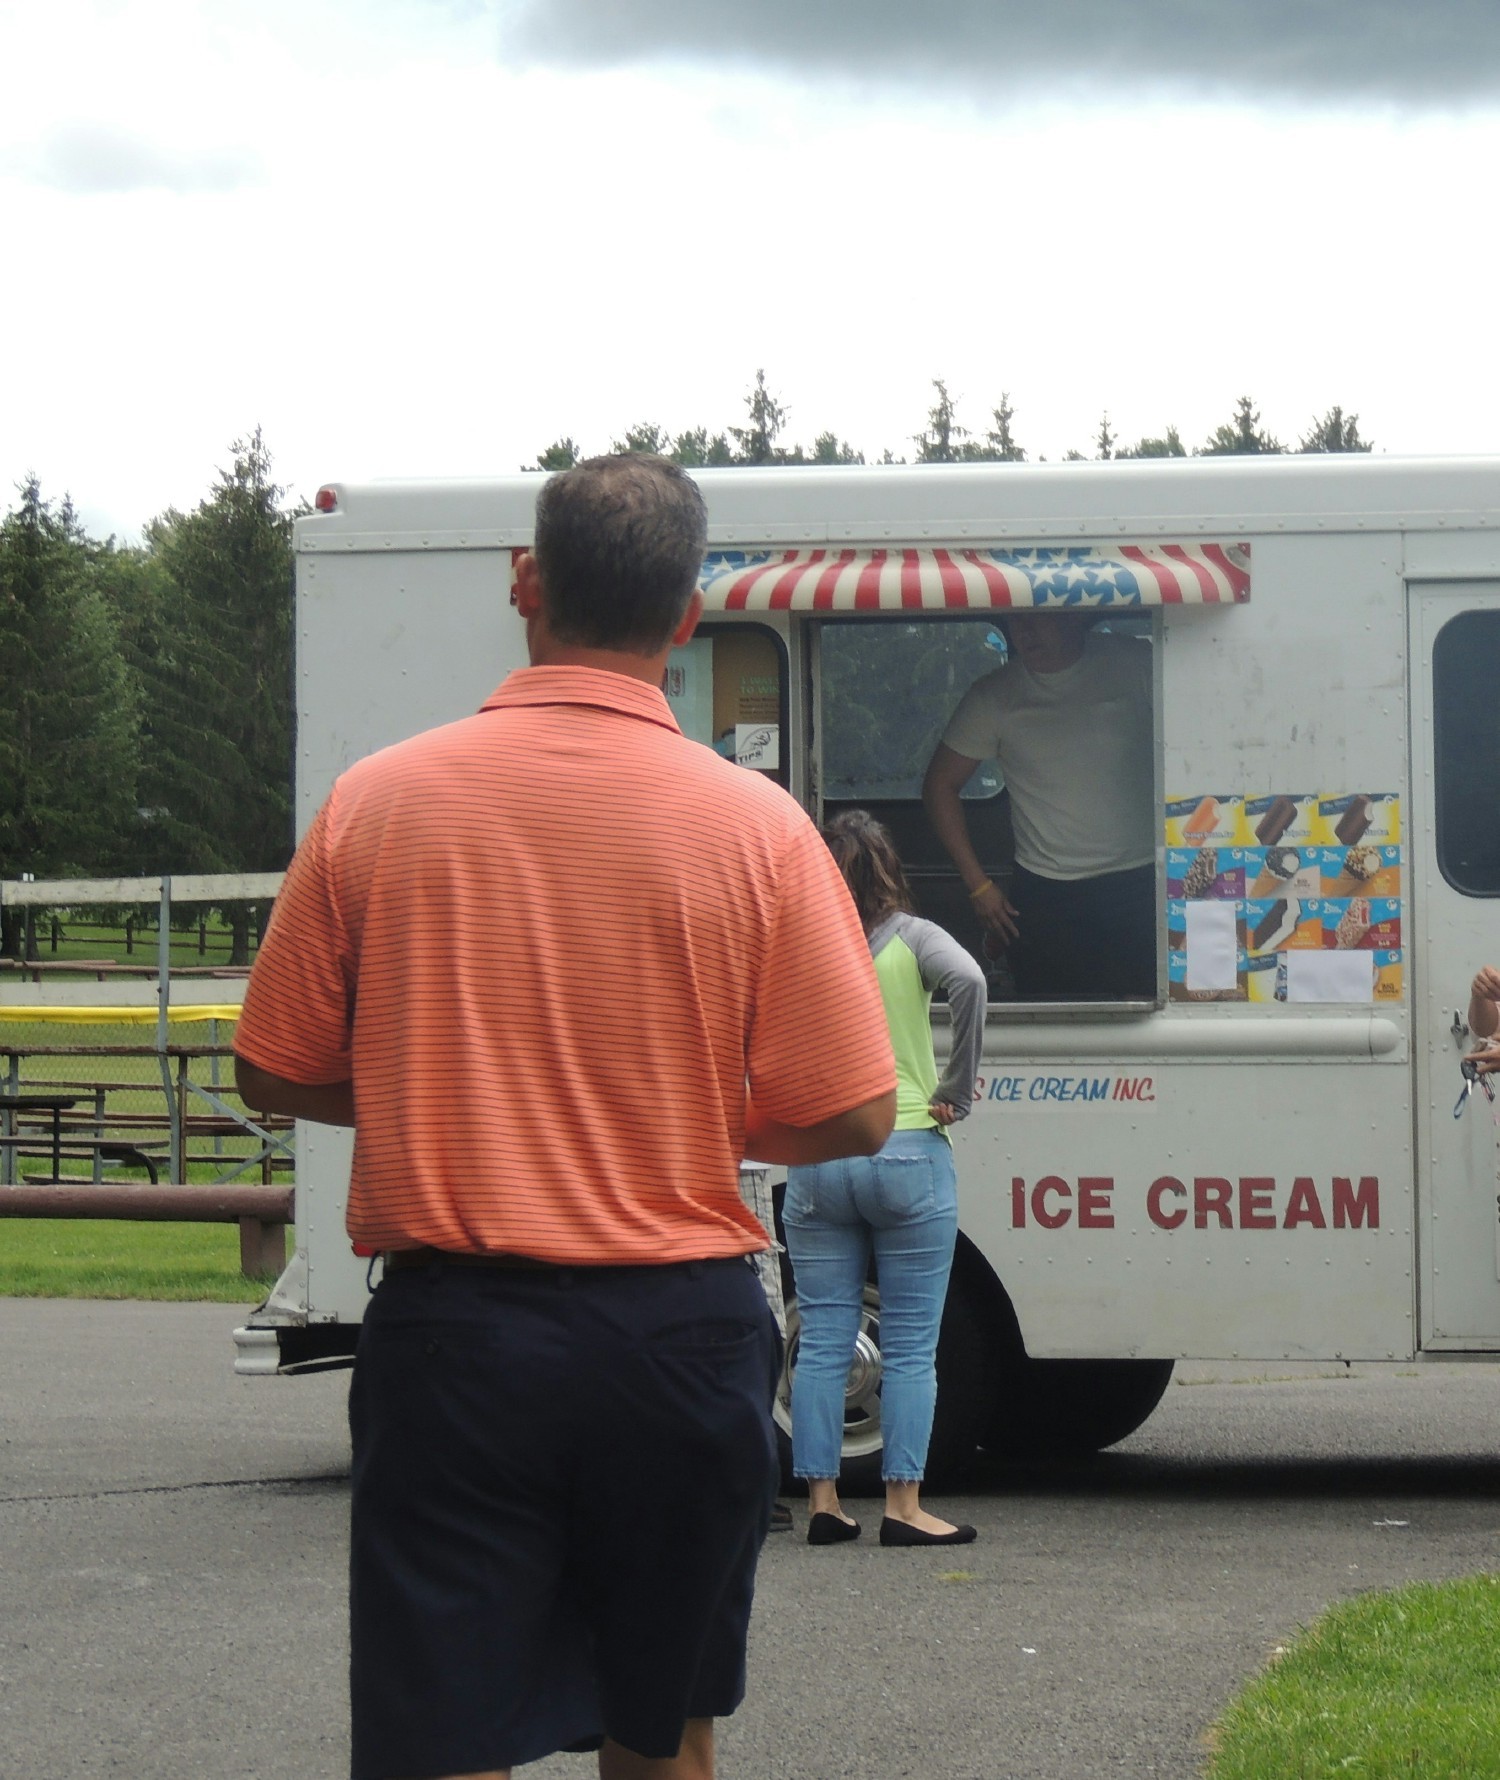 Team Members choosing which ice cream they would like to enjoy from the ice cream vendor!